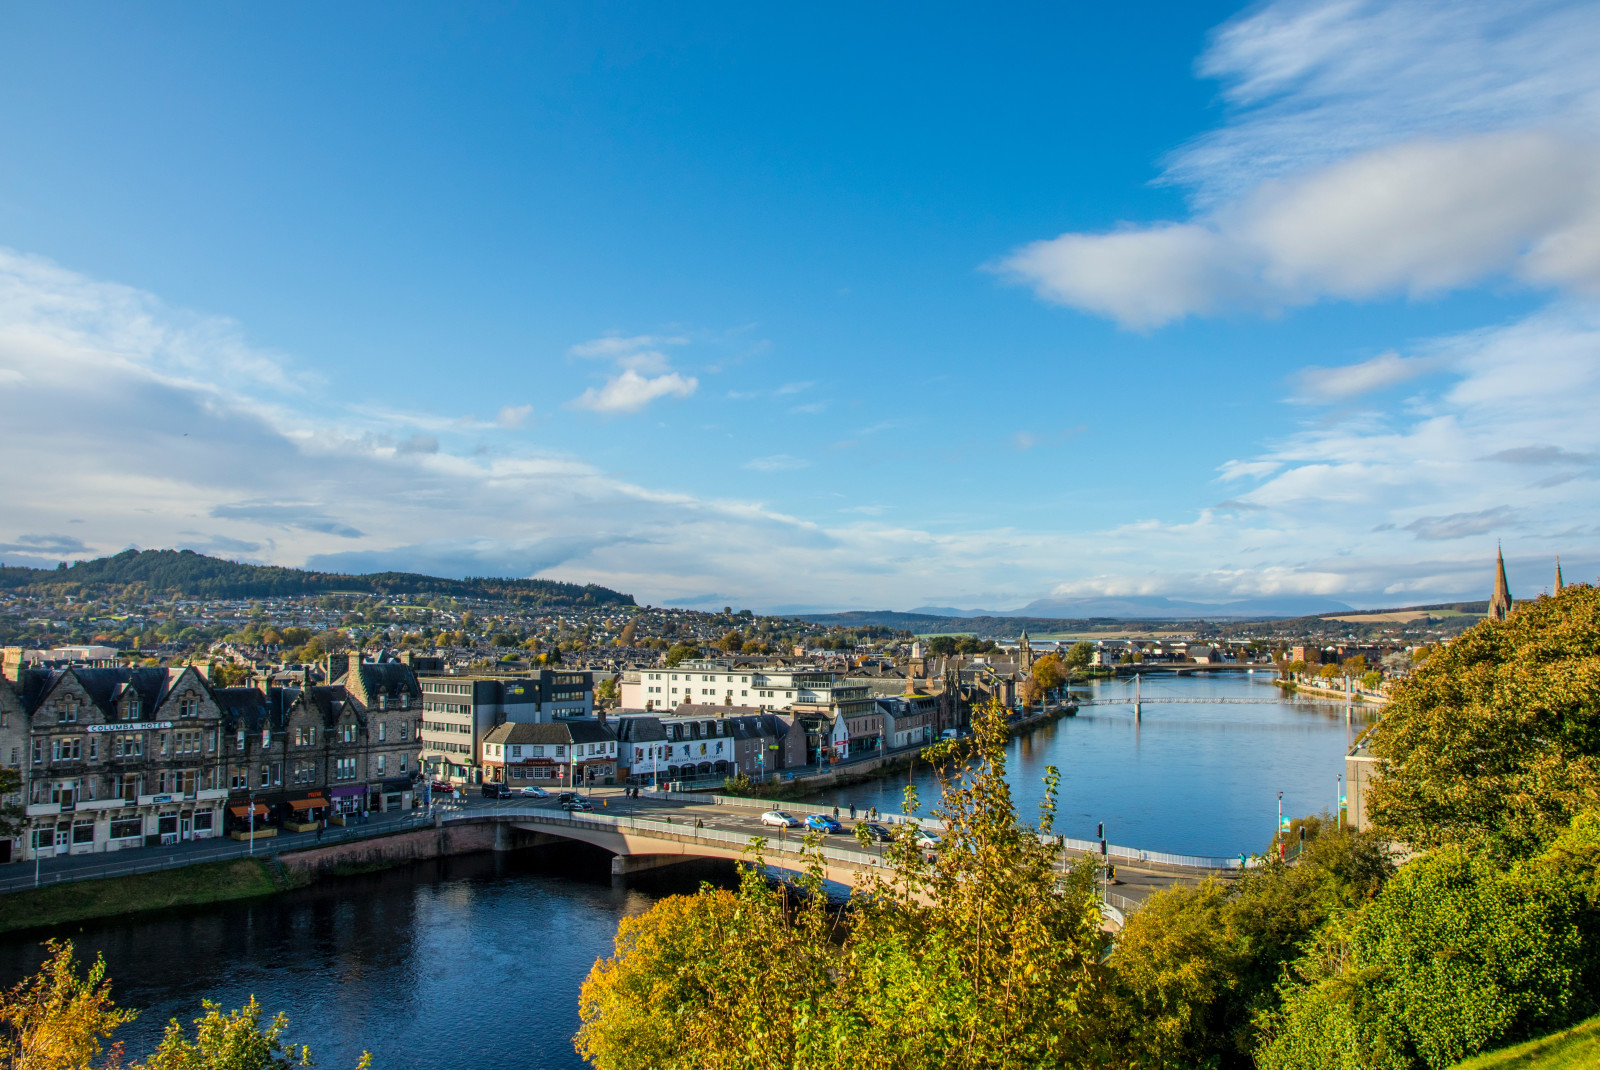 Overlooking the town of Inverness, Scotland with a cluster of brown and white tall homes and buildings, a bridge going over a blue river and trees at the basin.